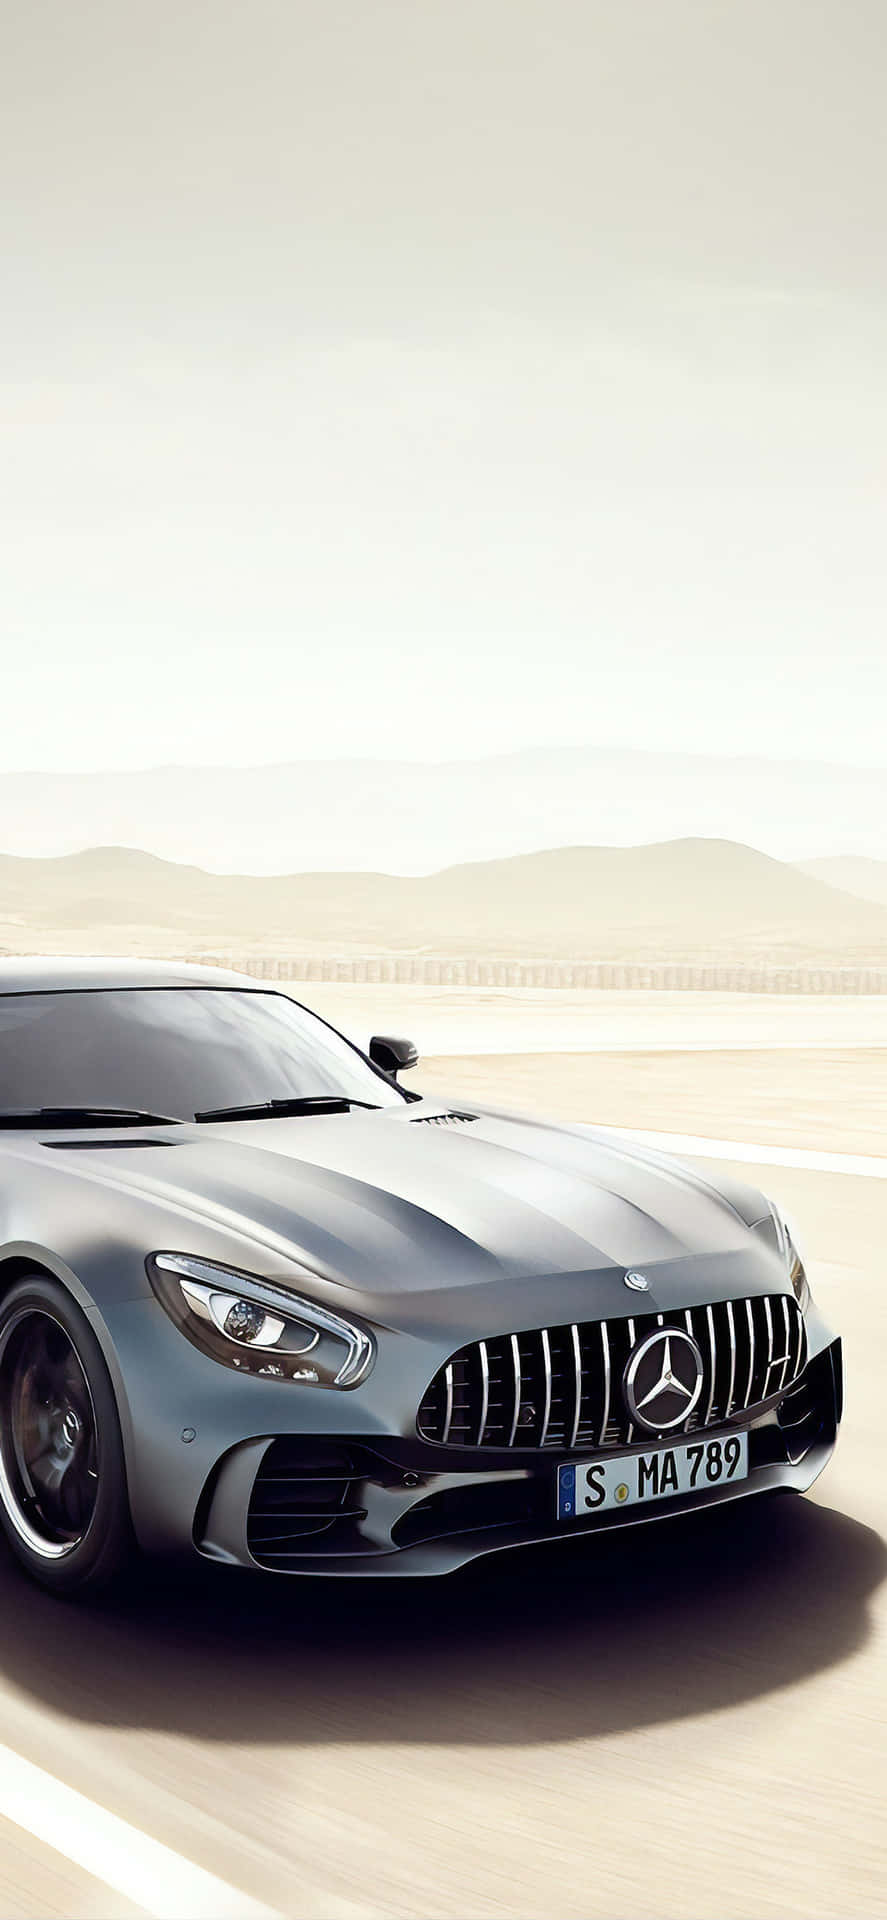 Iphone X Amg Gt-r Background Silver Nose AMG GT